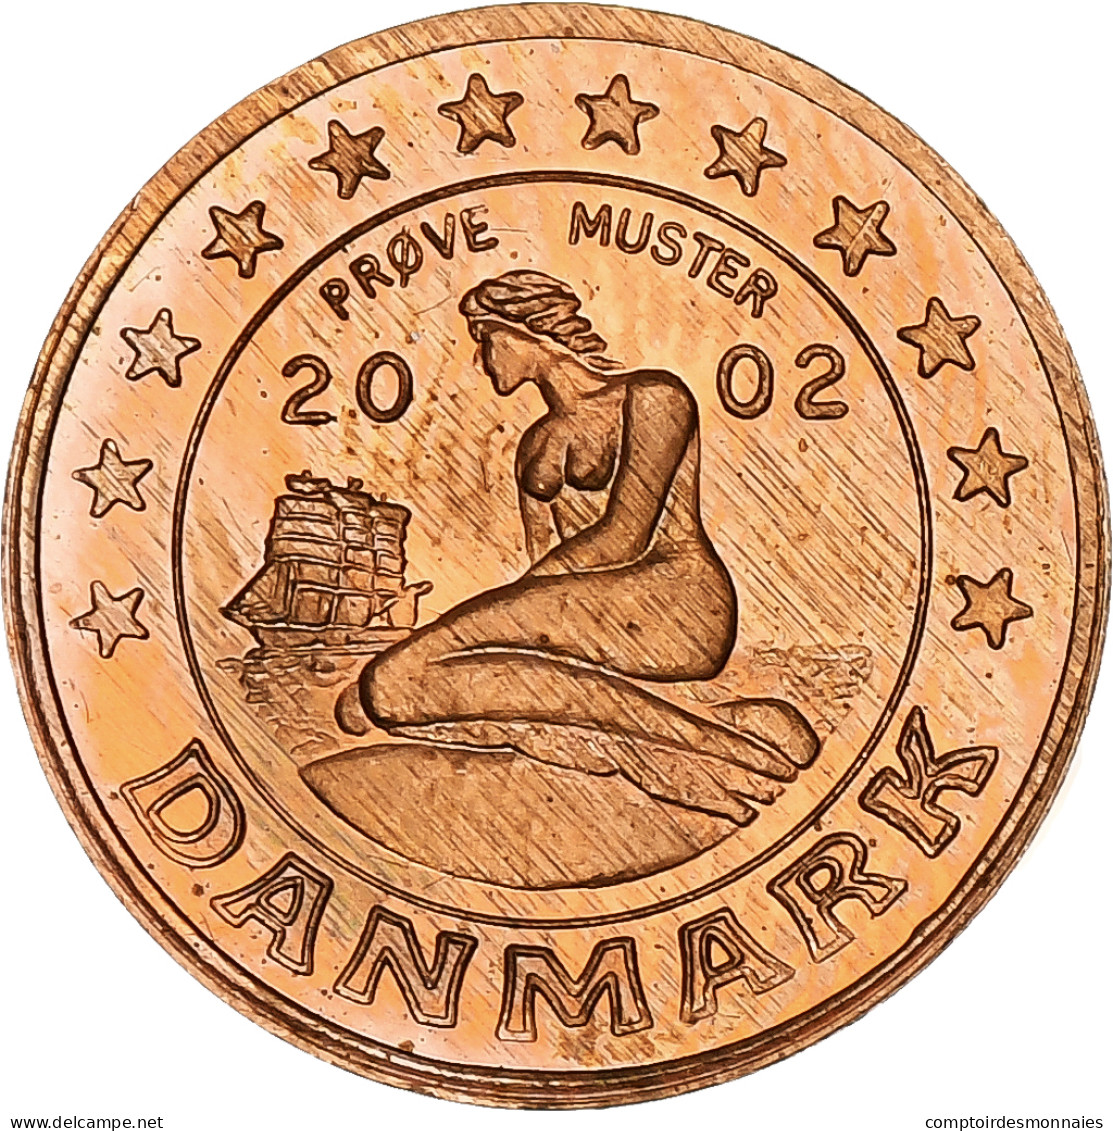 Danemark, Euro Cent, Fantasy Euro Patterns, Essai-Trial, BE, 2002, Cuivre, FDC - Private Proofs / Unofficial